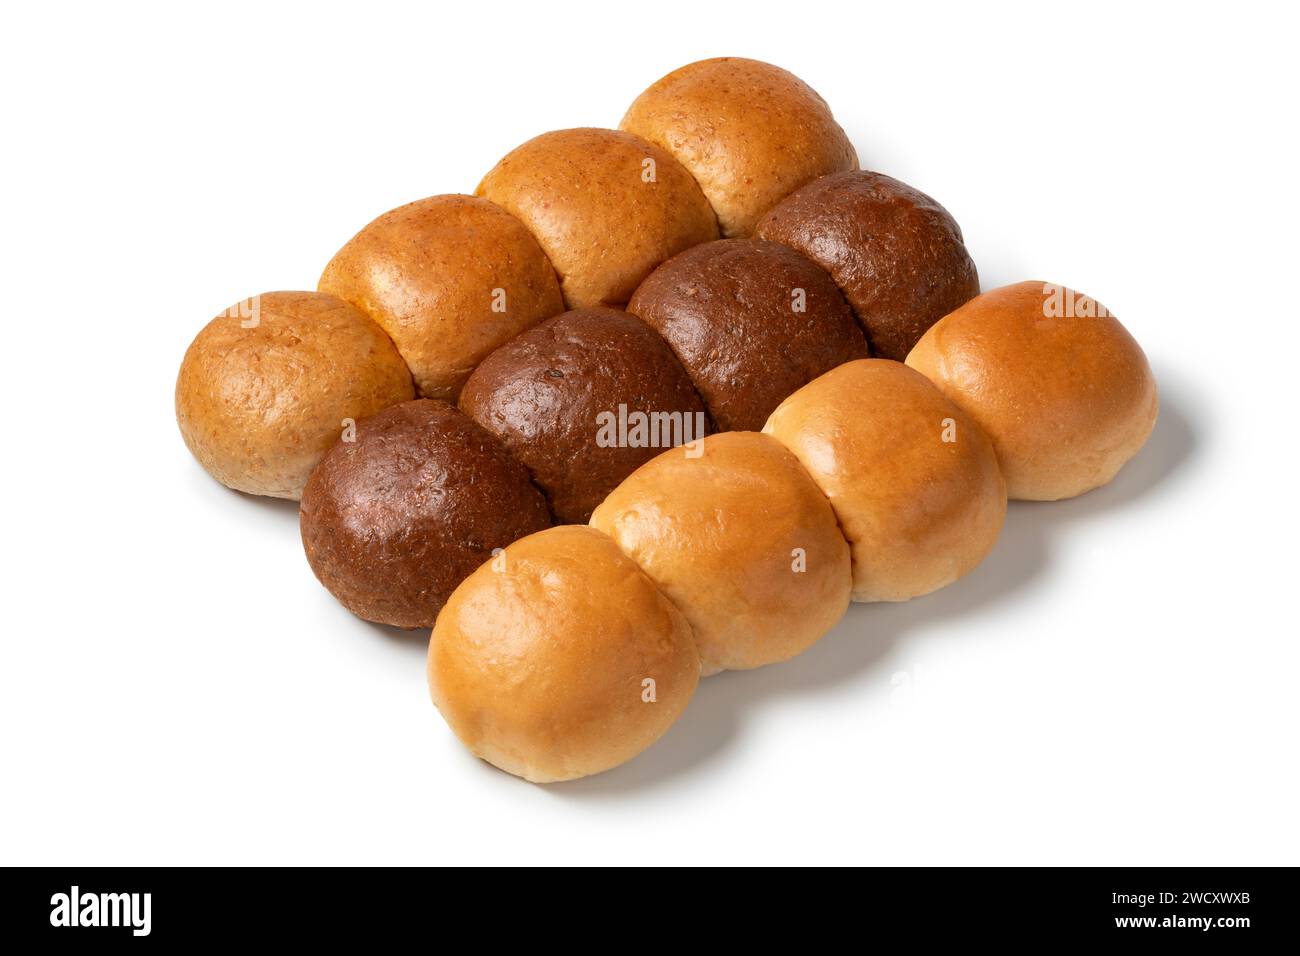 Variation of fresh baked white and brown buns of bread close up isolated on white background Stock Photo